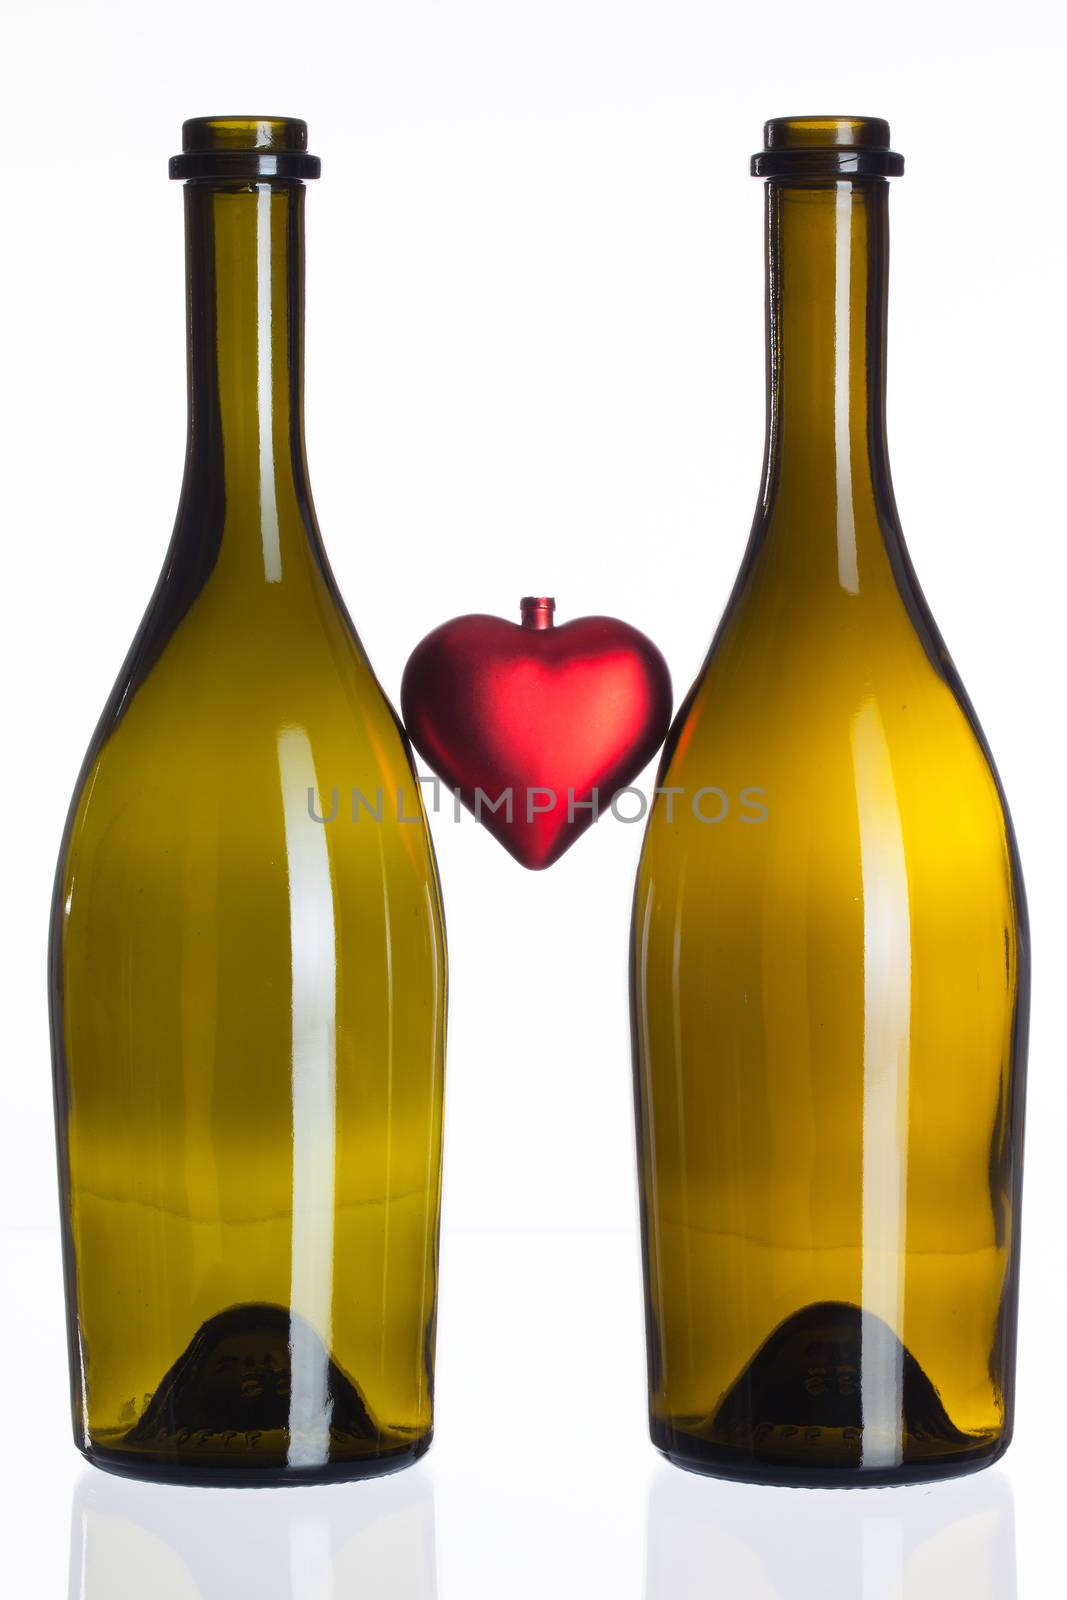 Empty bottles of wine and red heart on a glass table